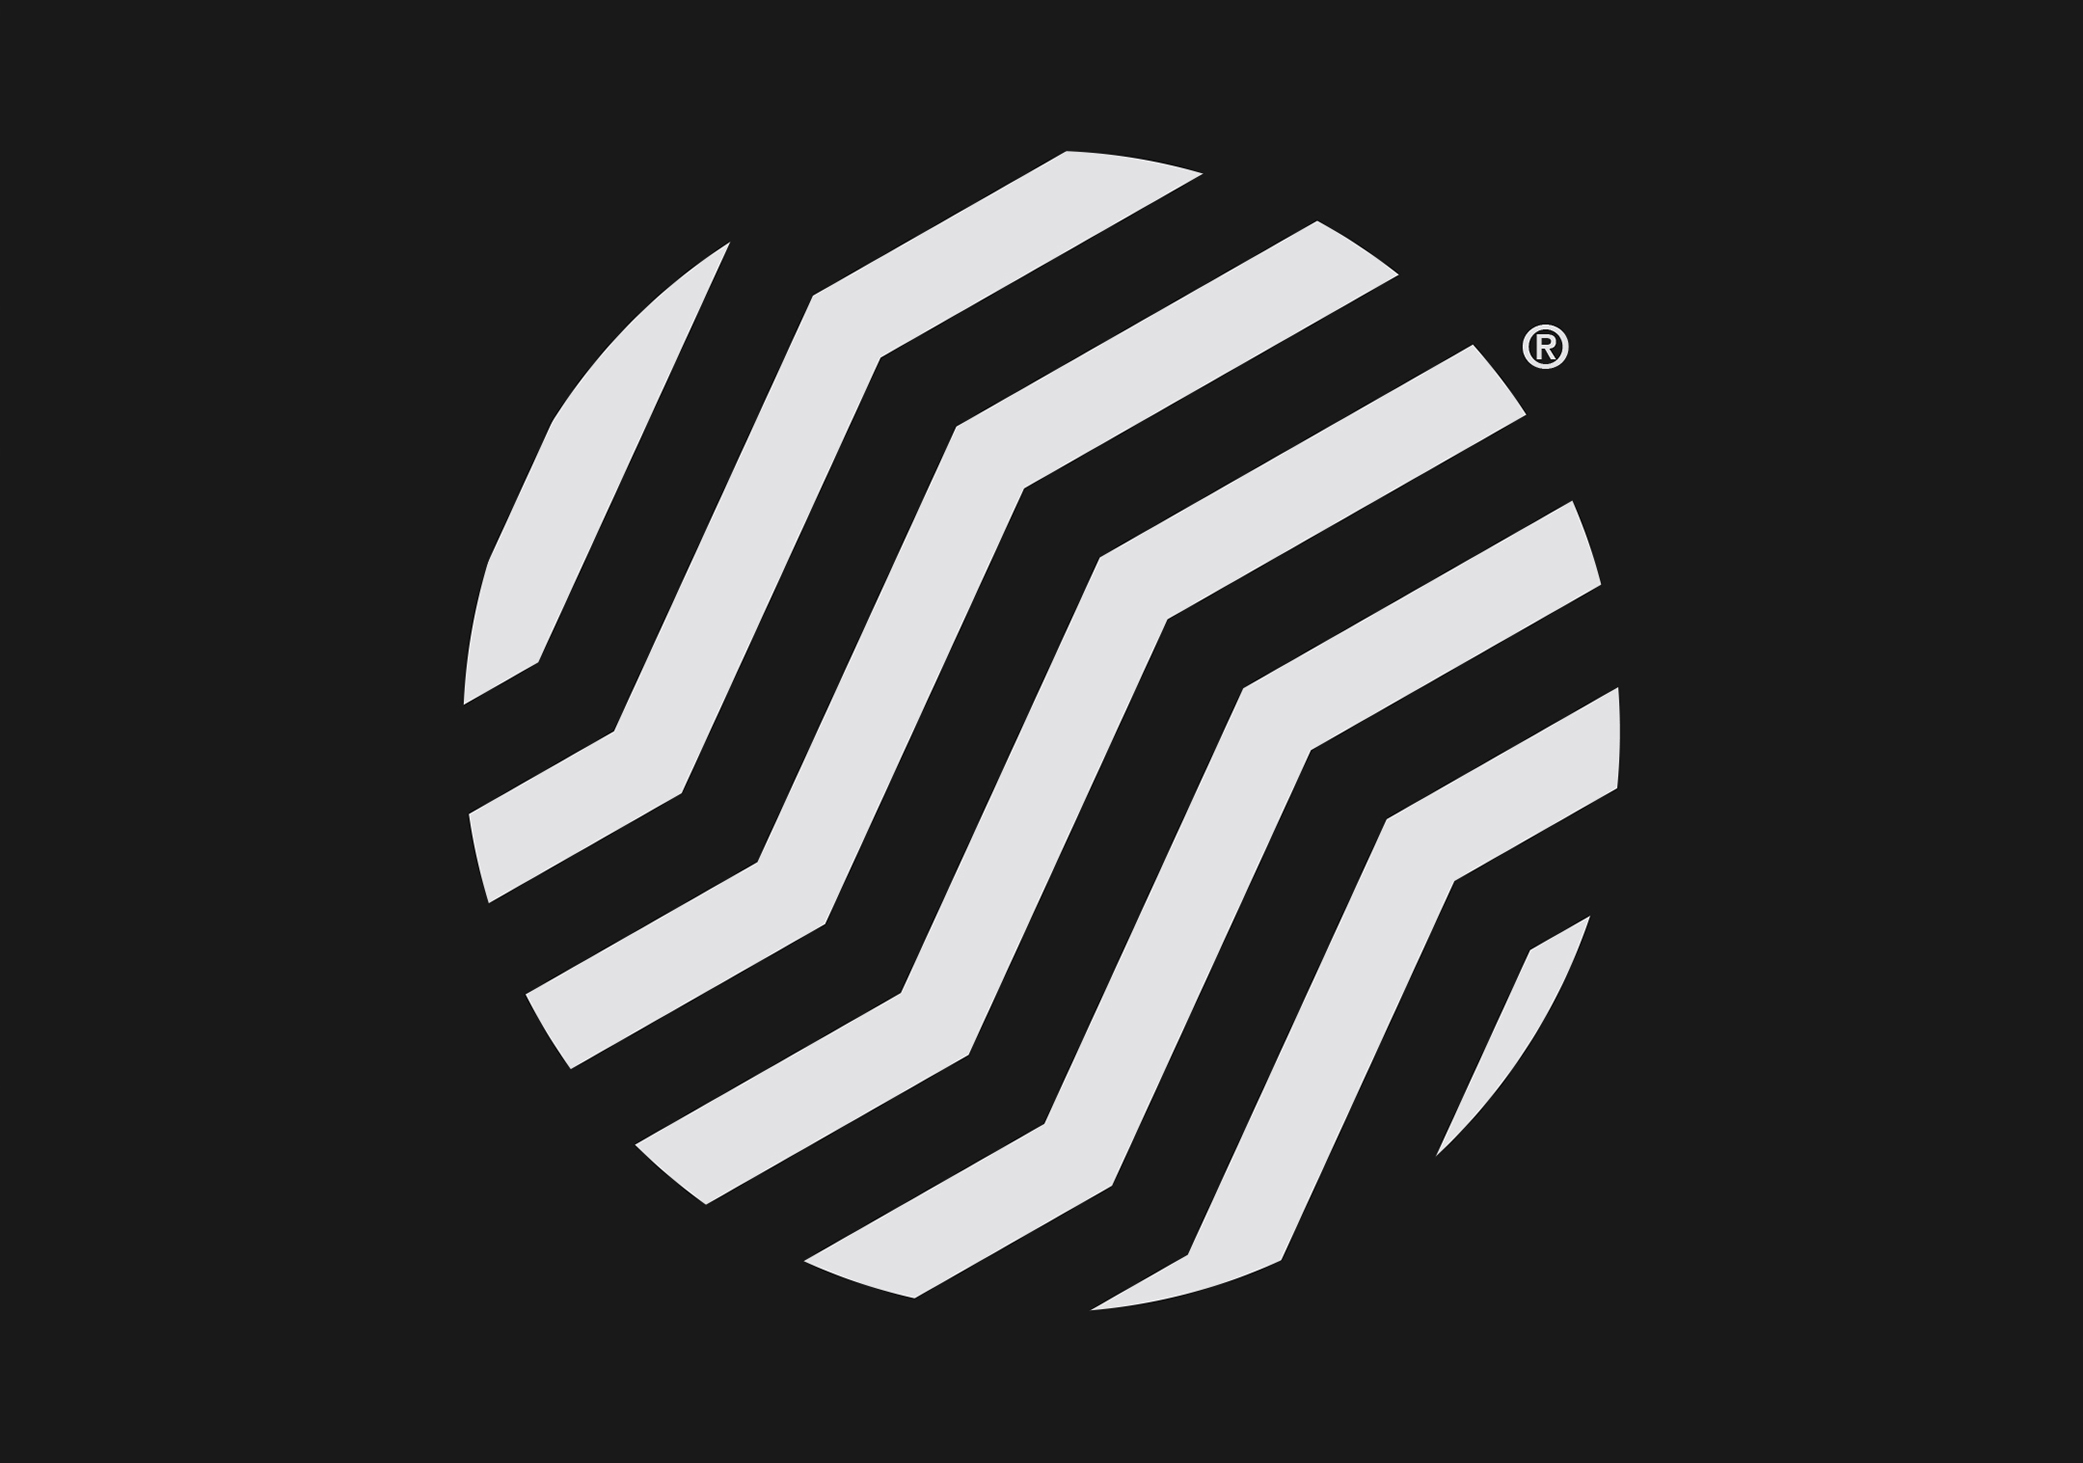 Geometric logo design of white zig zag lines in a circular shape on a black background